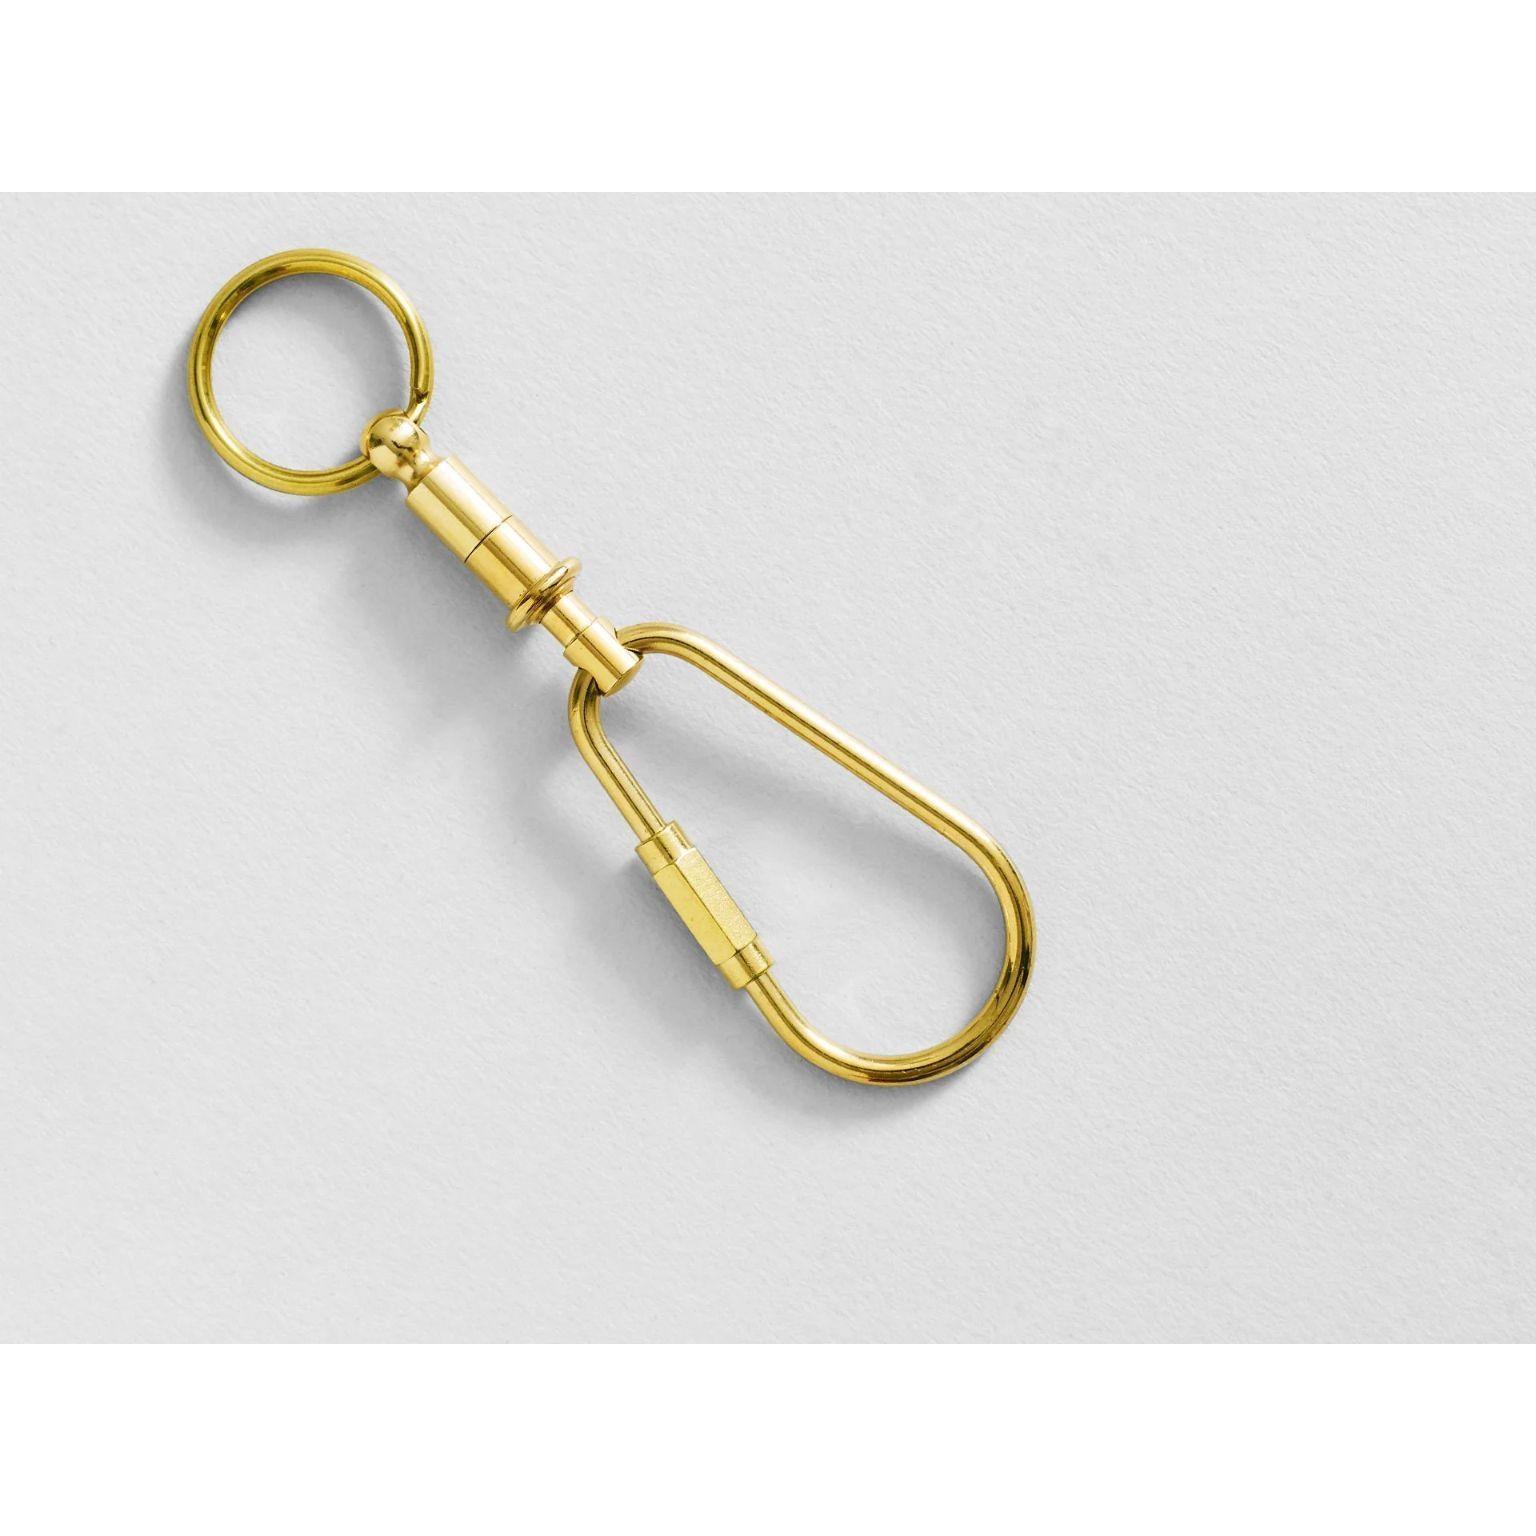 Quick Release Key Ring by Henry Wilson
Dimensions: D 8 x H 8 cm
Materials: Brass
Solid brass machined key ring with quick release.

